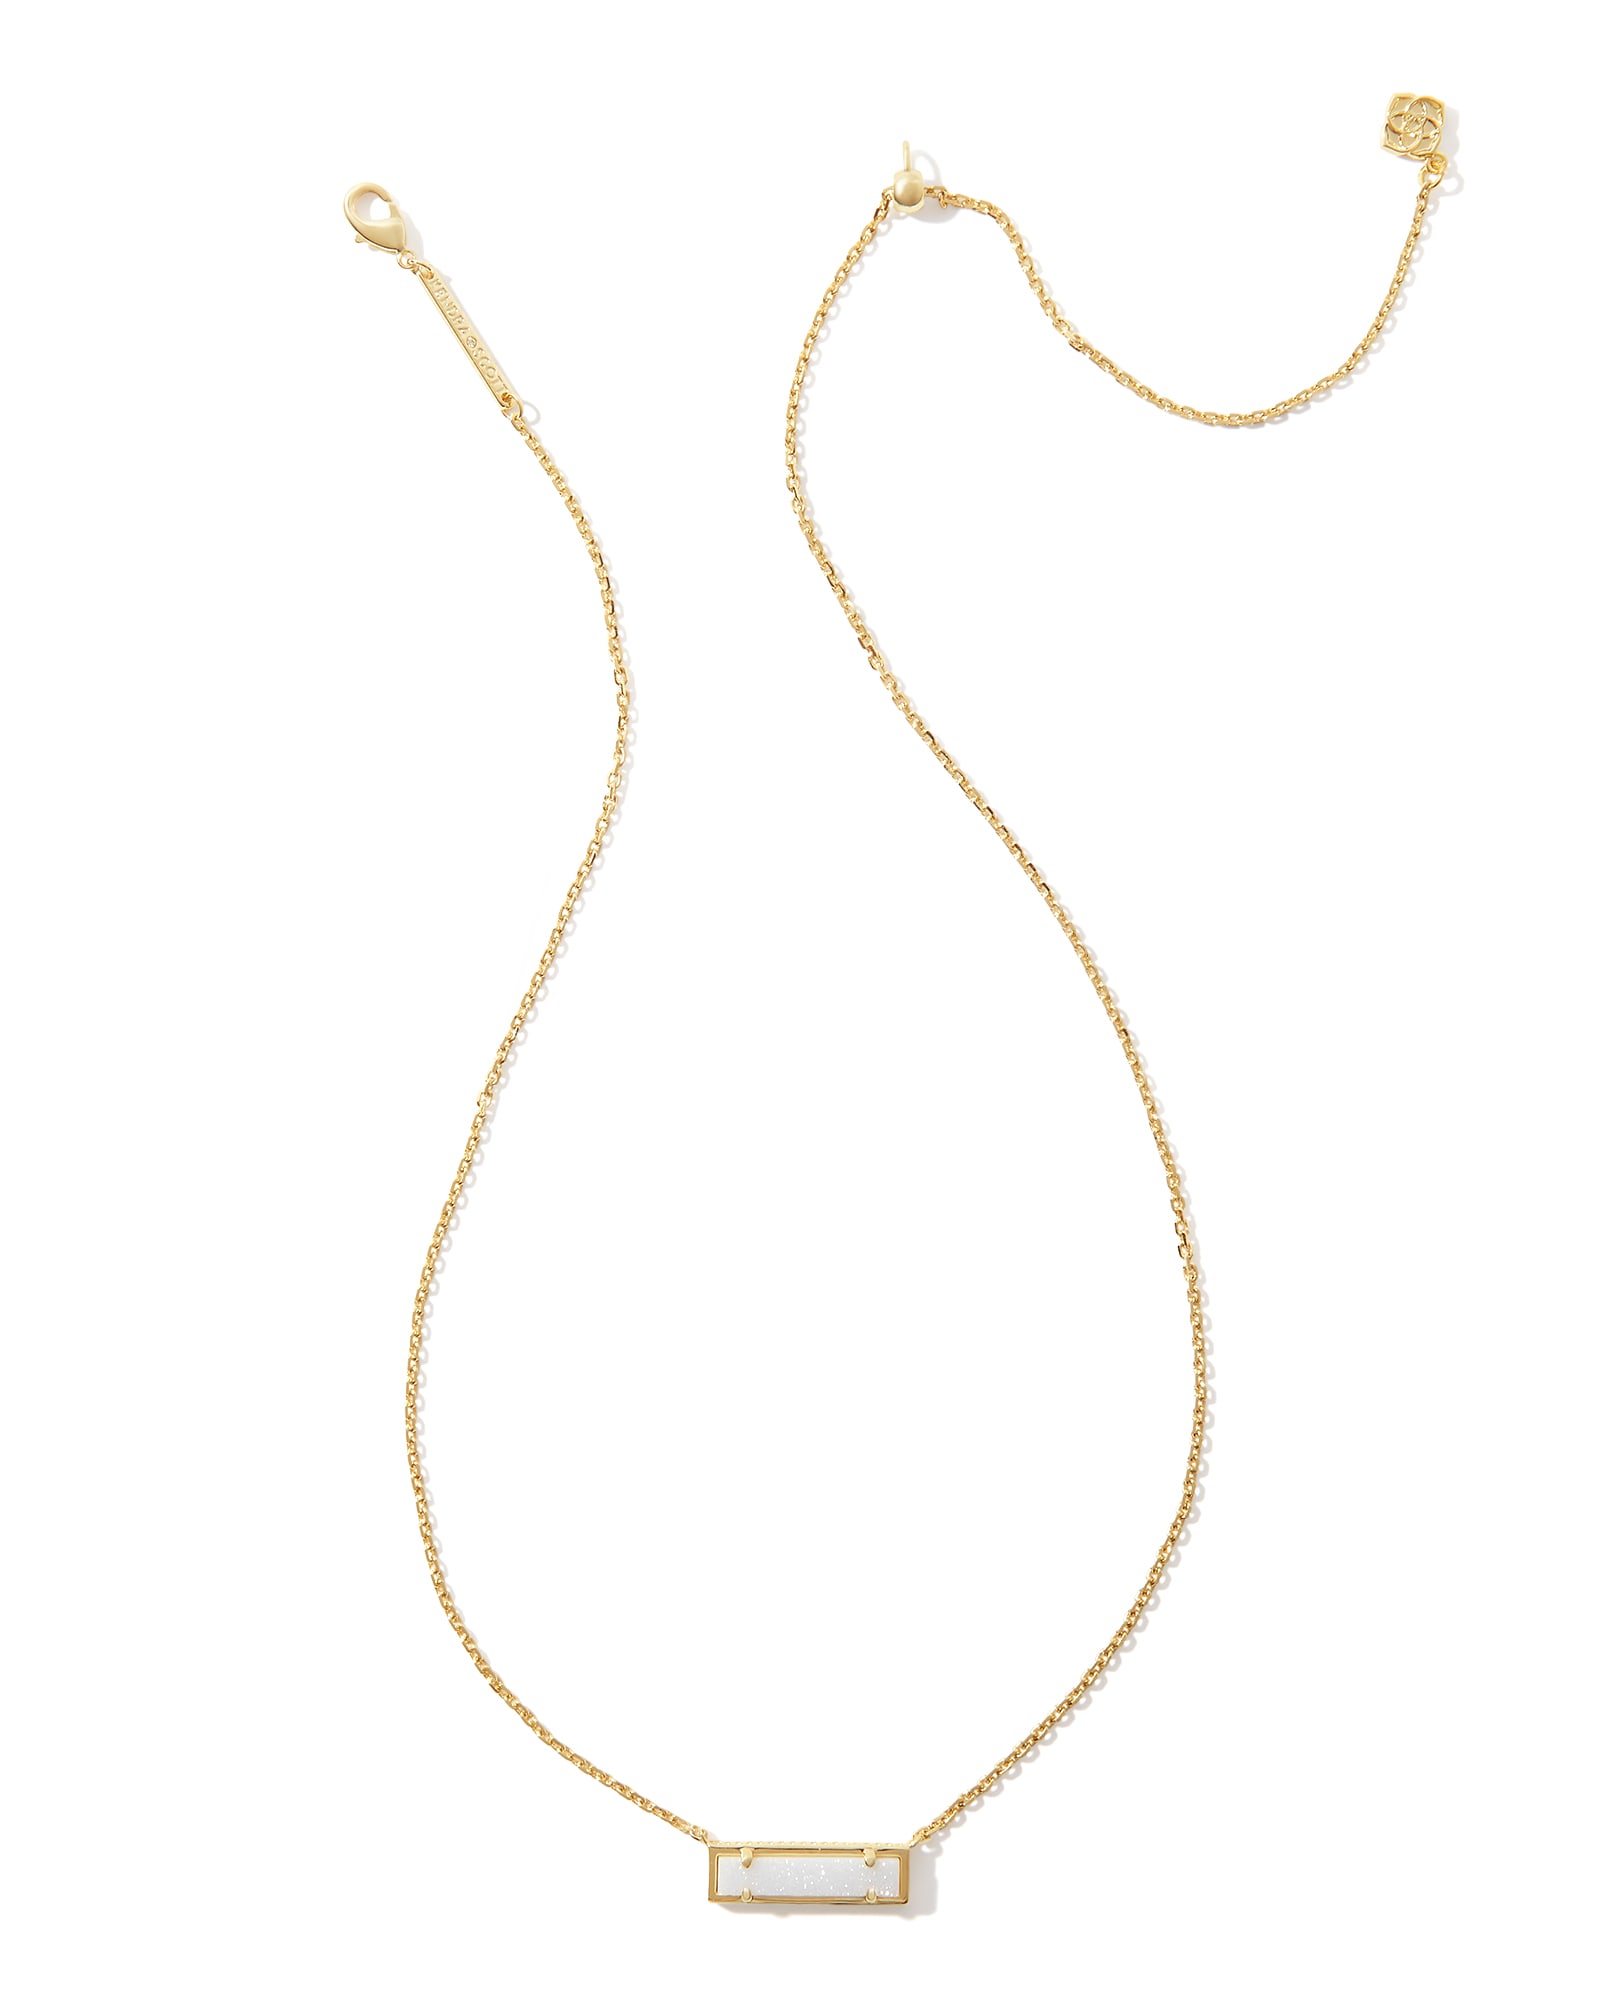 Leanor Gold Short Pendant Necklace in Iridescent Drusy